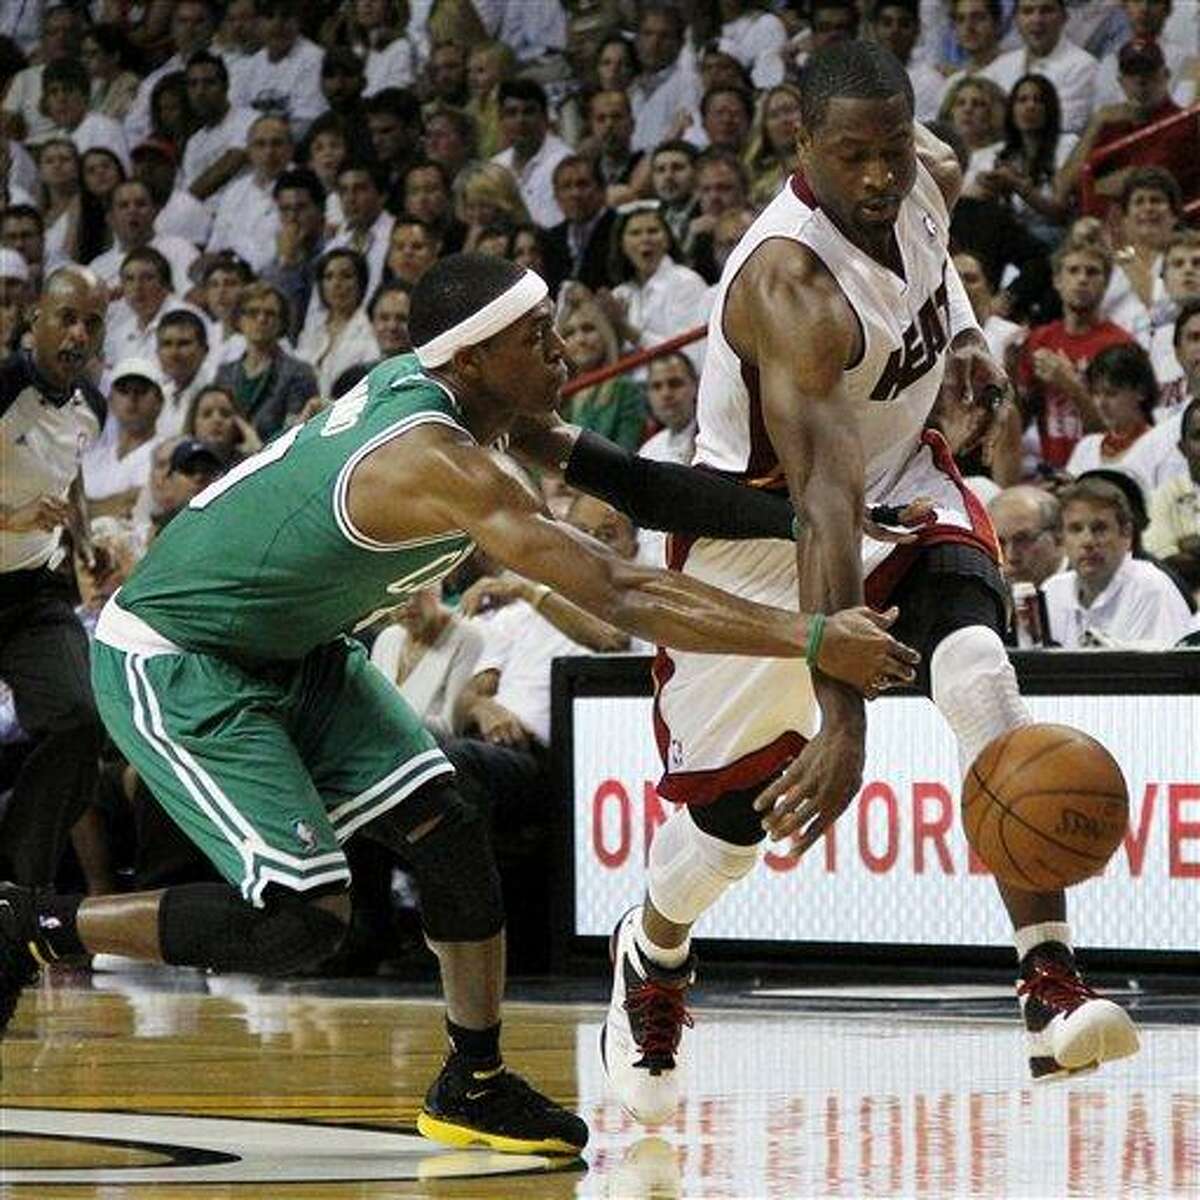 Miami Heat's Dwyane Wade (3) loses the ball as Boston Celtics' Rajon Rondo (9) defends during the first half of Game 5 in their NBA basketball Eastern Conference finals playoffs series, Tuesday, June 5, 2012, in Miami. (AP Photo/Lynne Sladky)